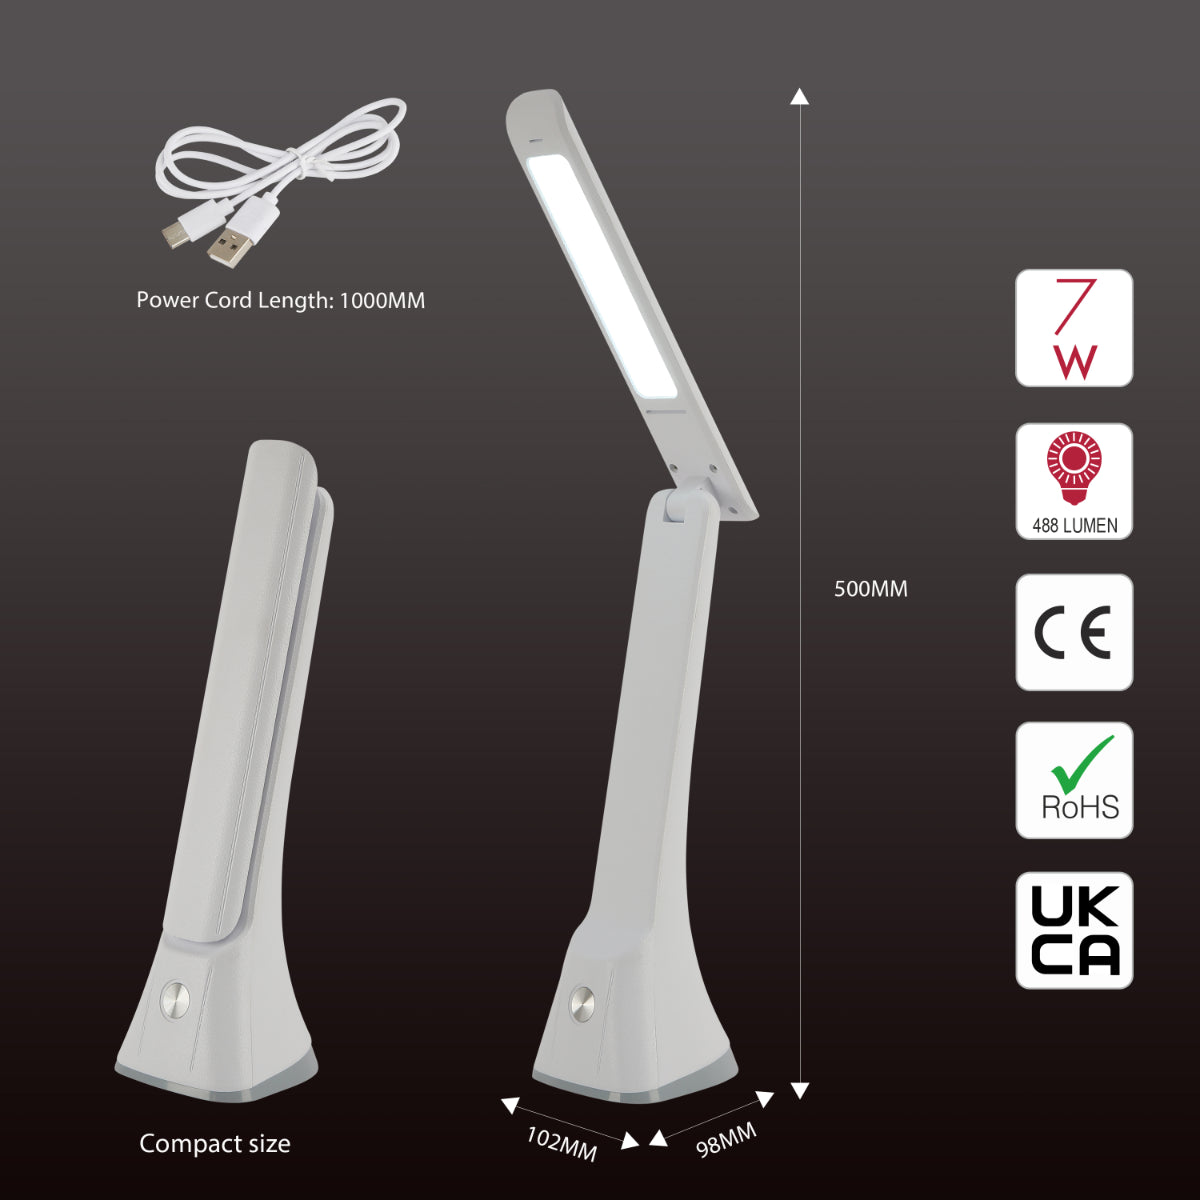 Size and certifications of Sleek Foldable LED Desk Lamp with Touch Control 130-03762